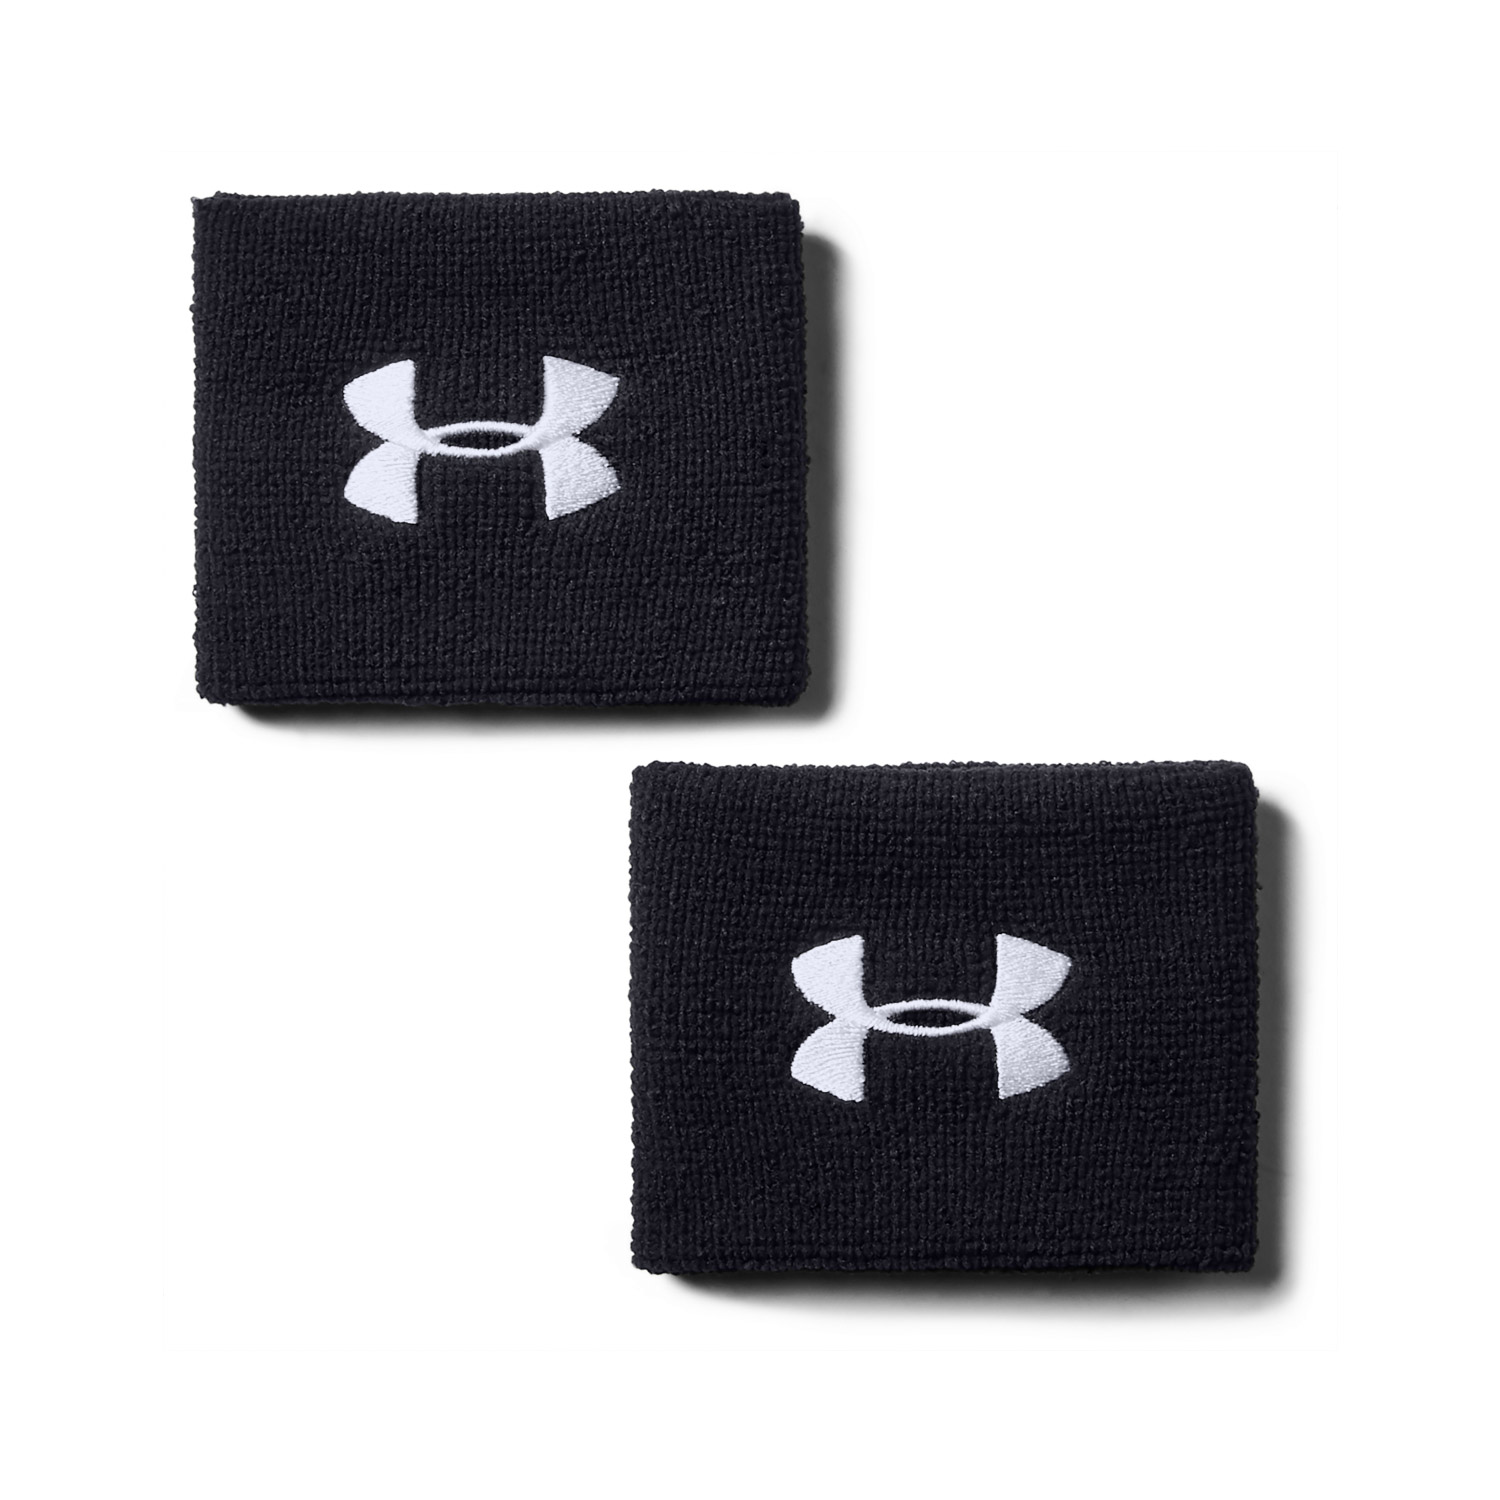 Under Armour Performance Wristbands (1276991-001)